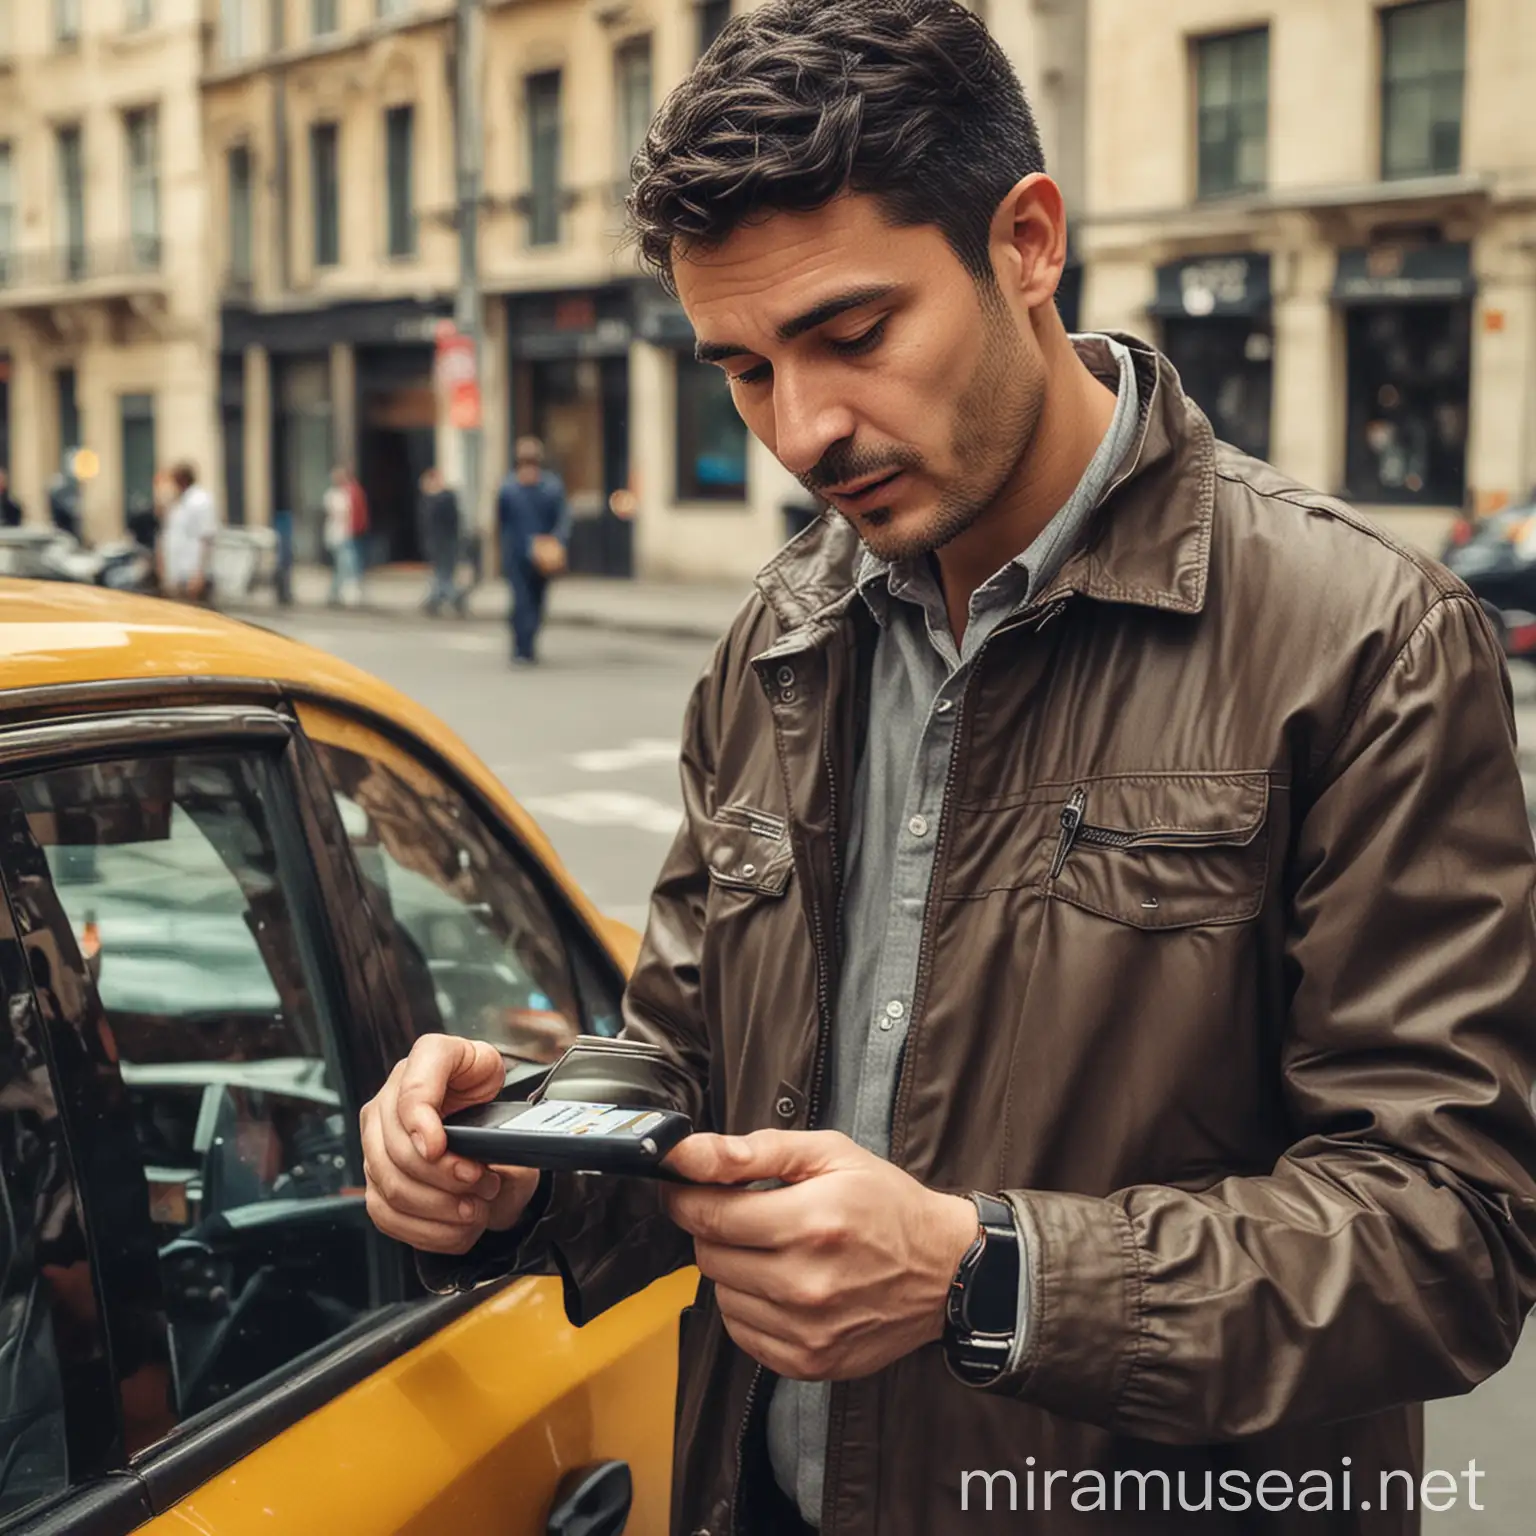 Taxi Driver Scanning Document with Smartphone for Verification